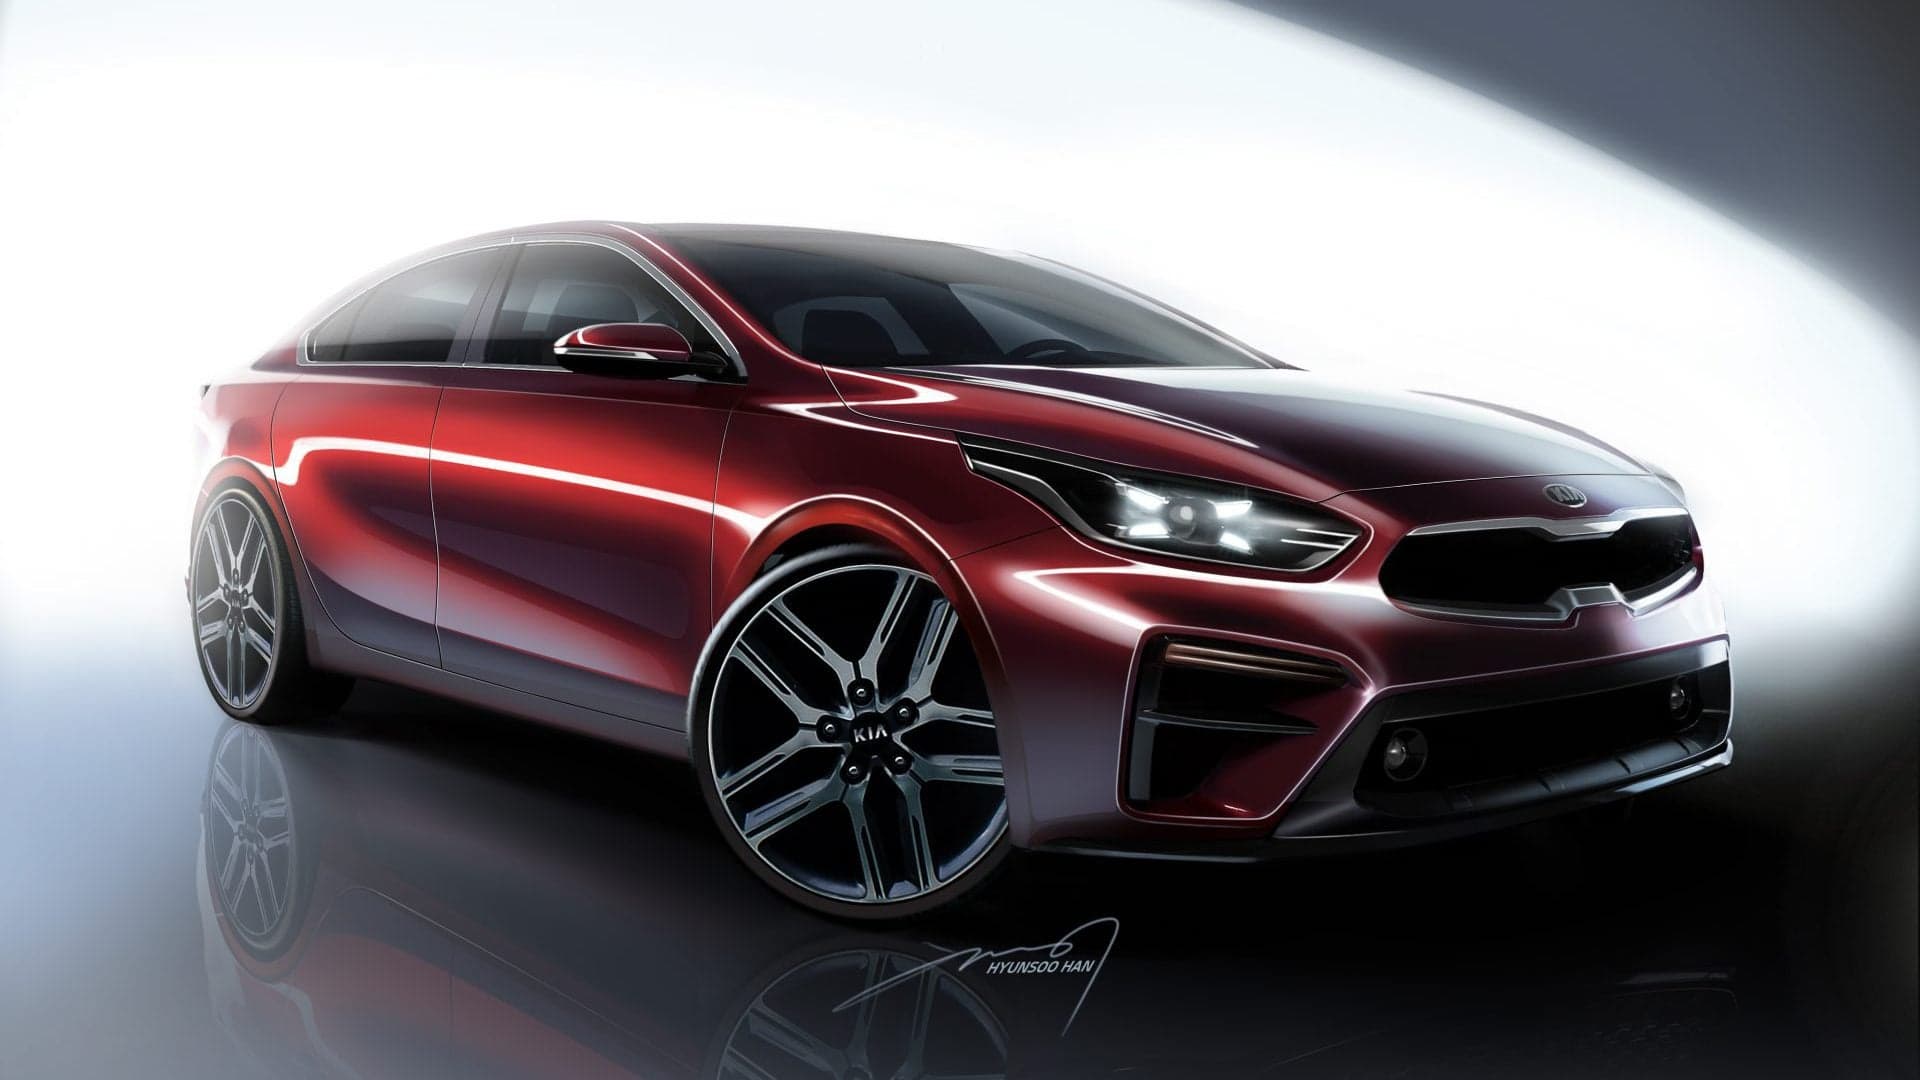 Here’s a Sketch of the 2019 Kia Forte